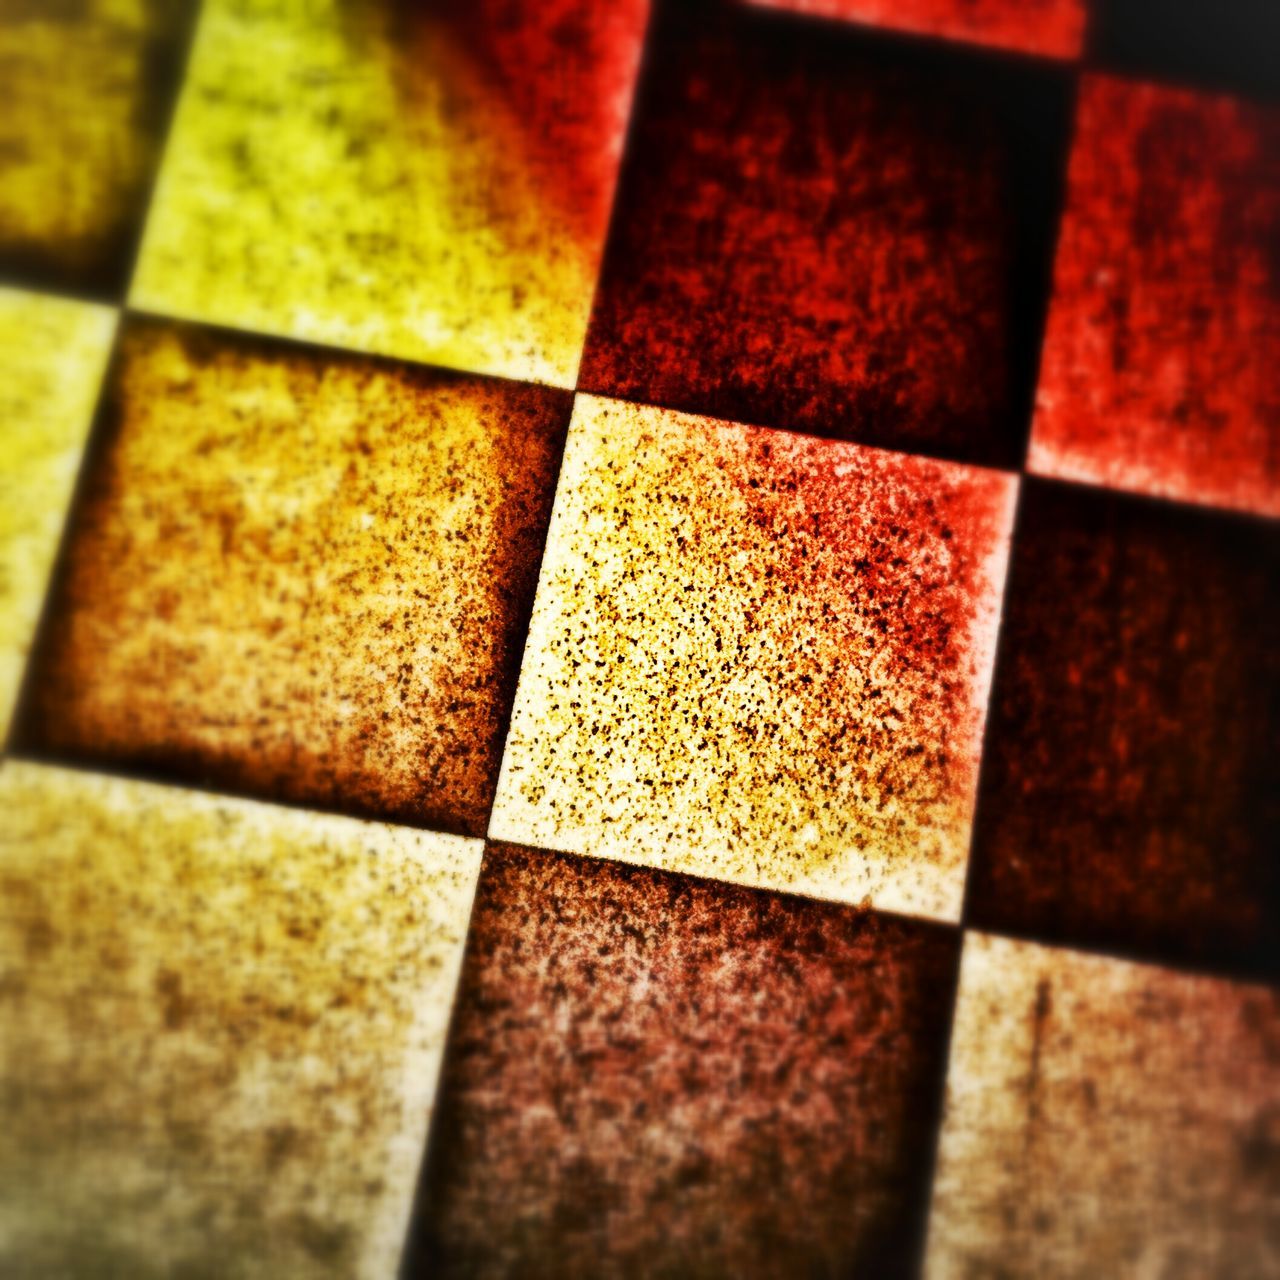 full frame, backgrounds, pattern, indoors, flooring, textured, selective focus, high angle view, close-up, tiled floor, geometric shape, floor, surface level, square shape, no people, yellow, design, paving stone, day, shape